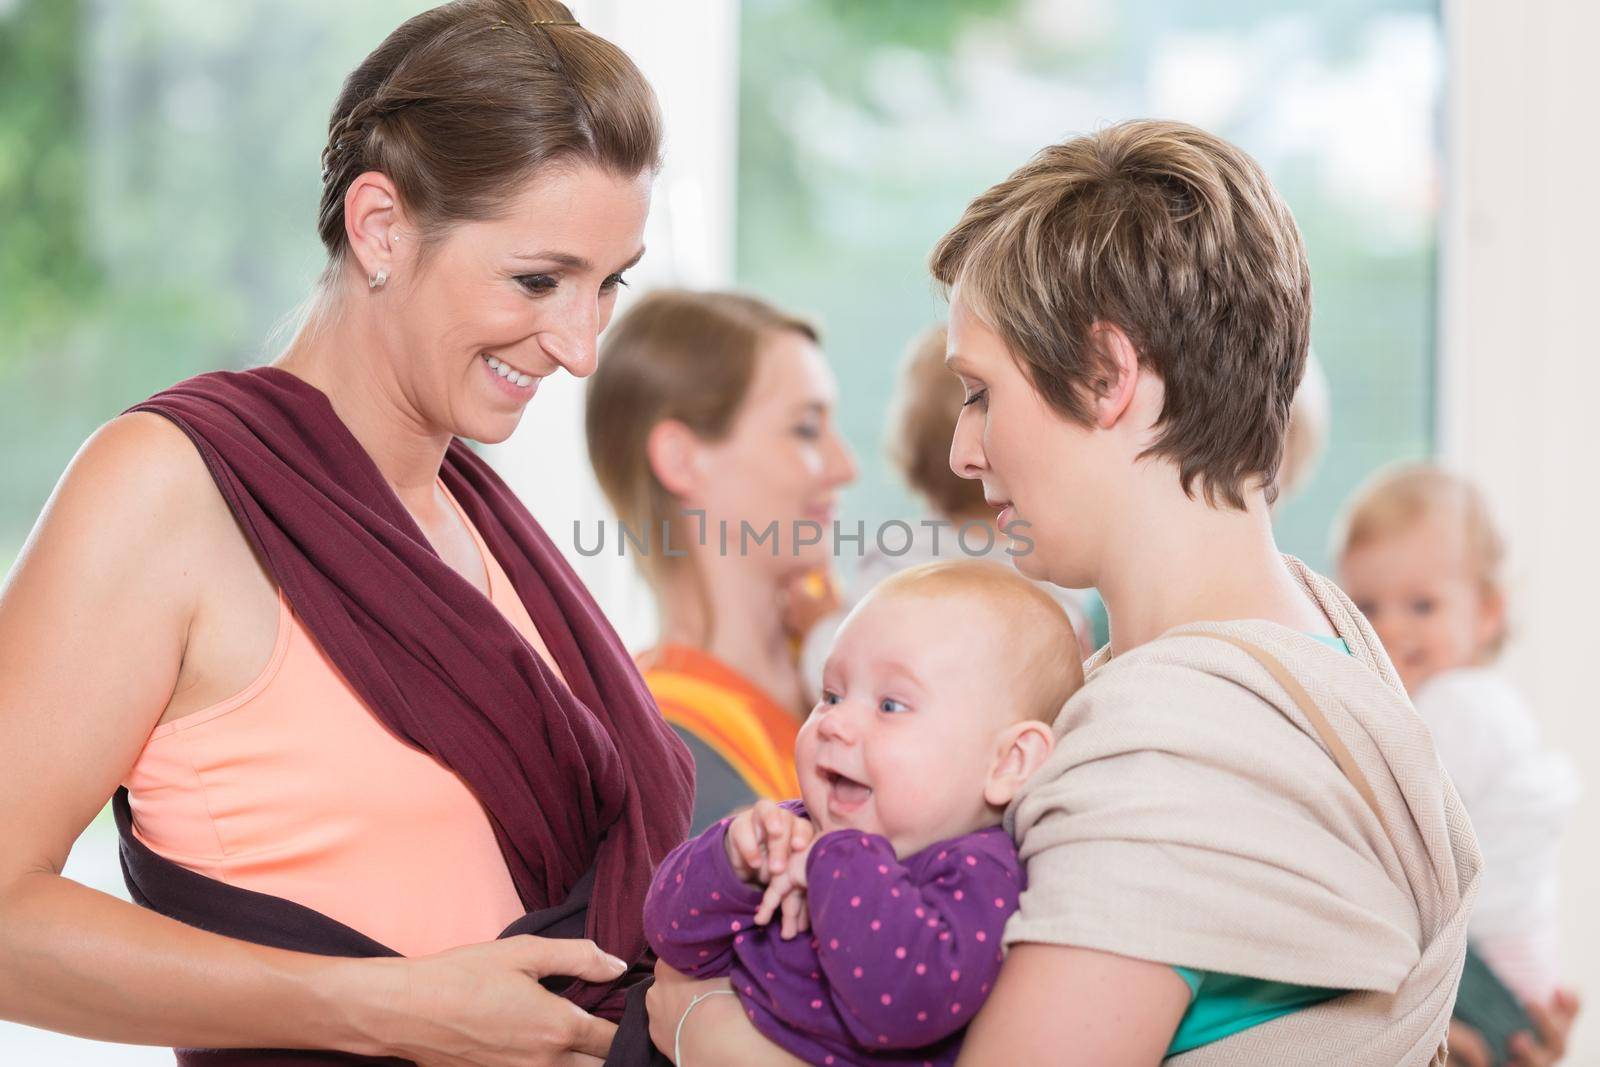 Young women learn how to use baby carriers for carrying children by Kzenon